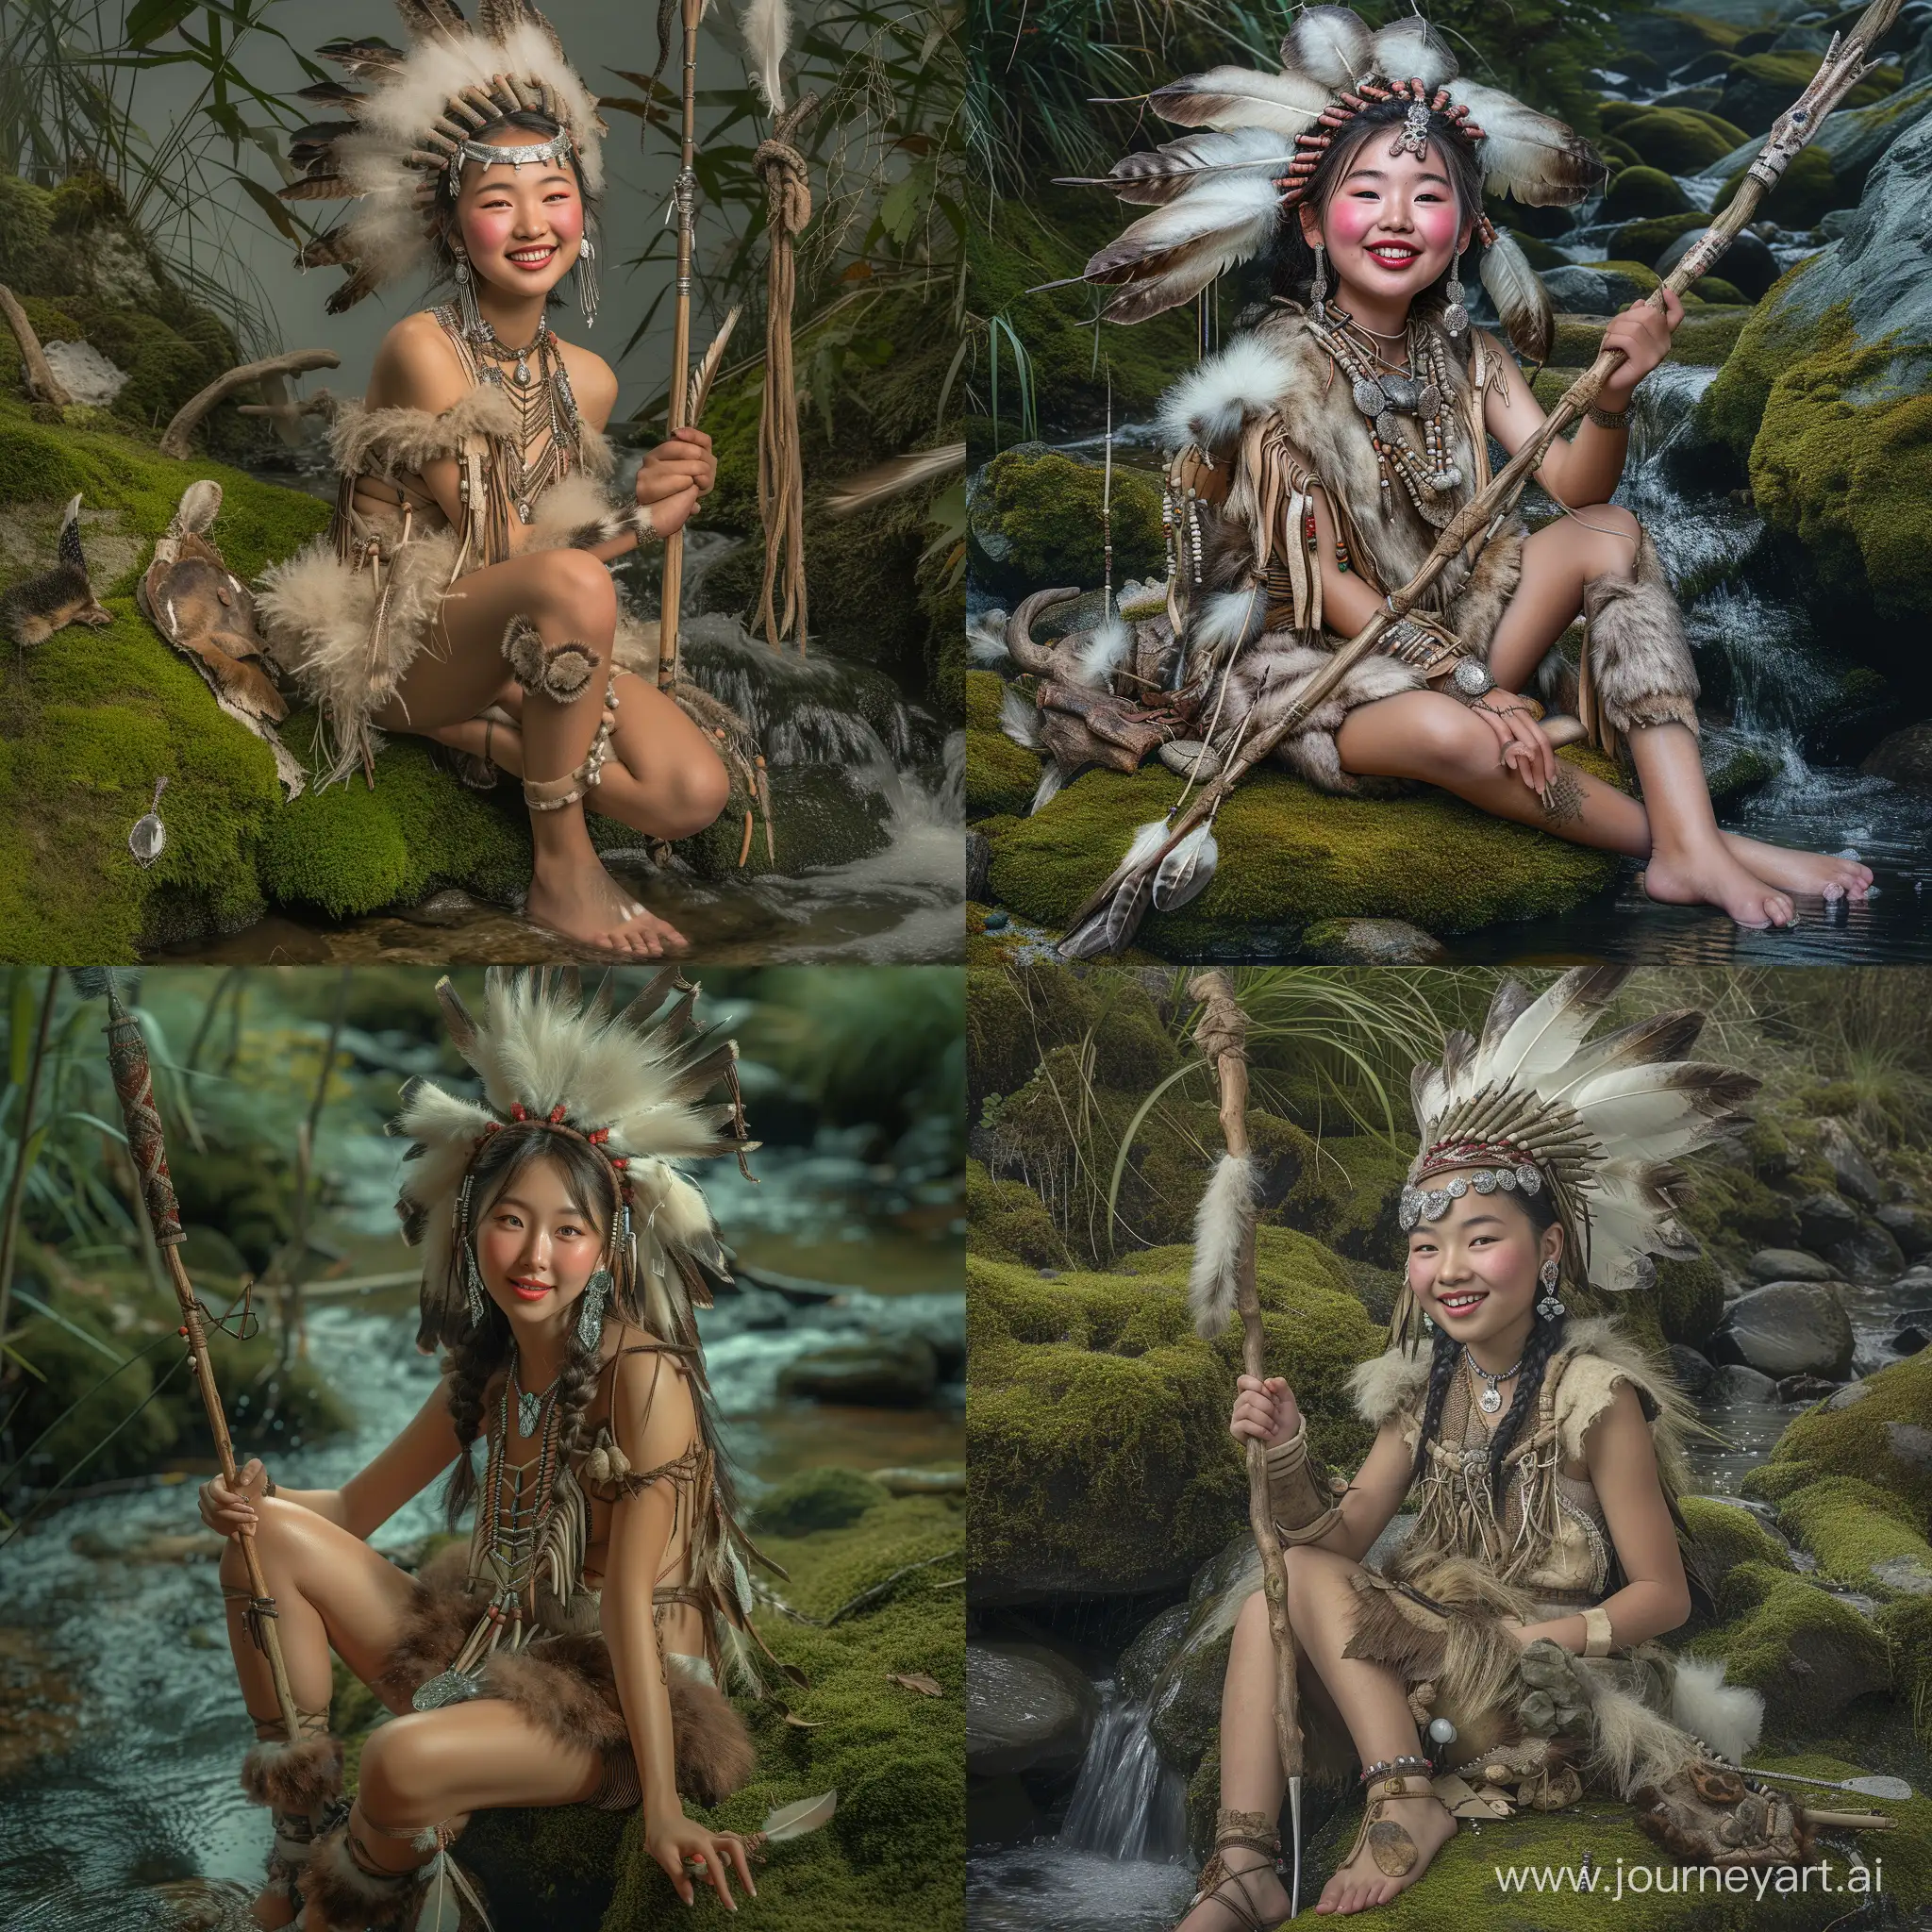 Realistic image of a 21 year old Asian girl, rosy cheeks, glossy lips, classic Native American pose, sitting on a moss-covered rock, feet next to a small stream, happy face , silver earrings, a necklace crafted with precious stones, long soft feathers combined to form a headdress, animal skins crafted into her outfit, her hand holding a spear wooden, landscape depth